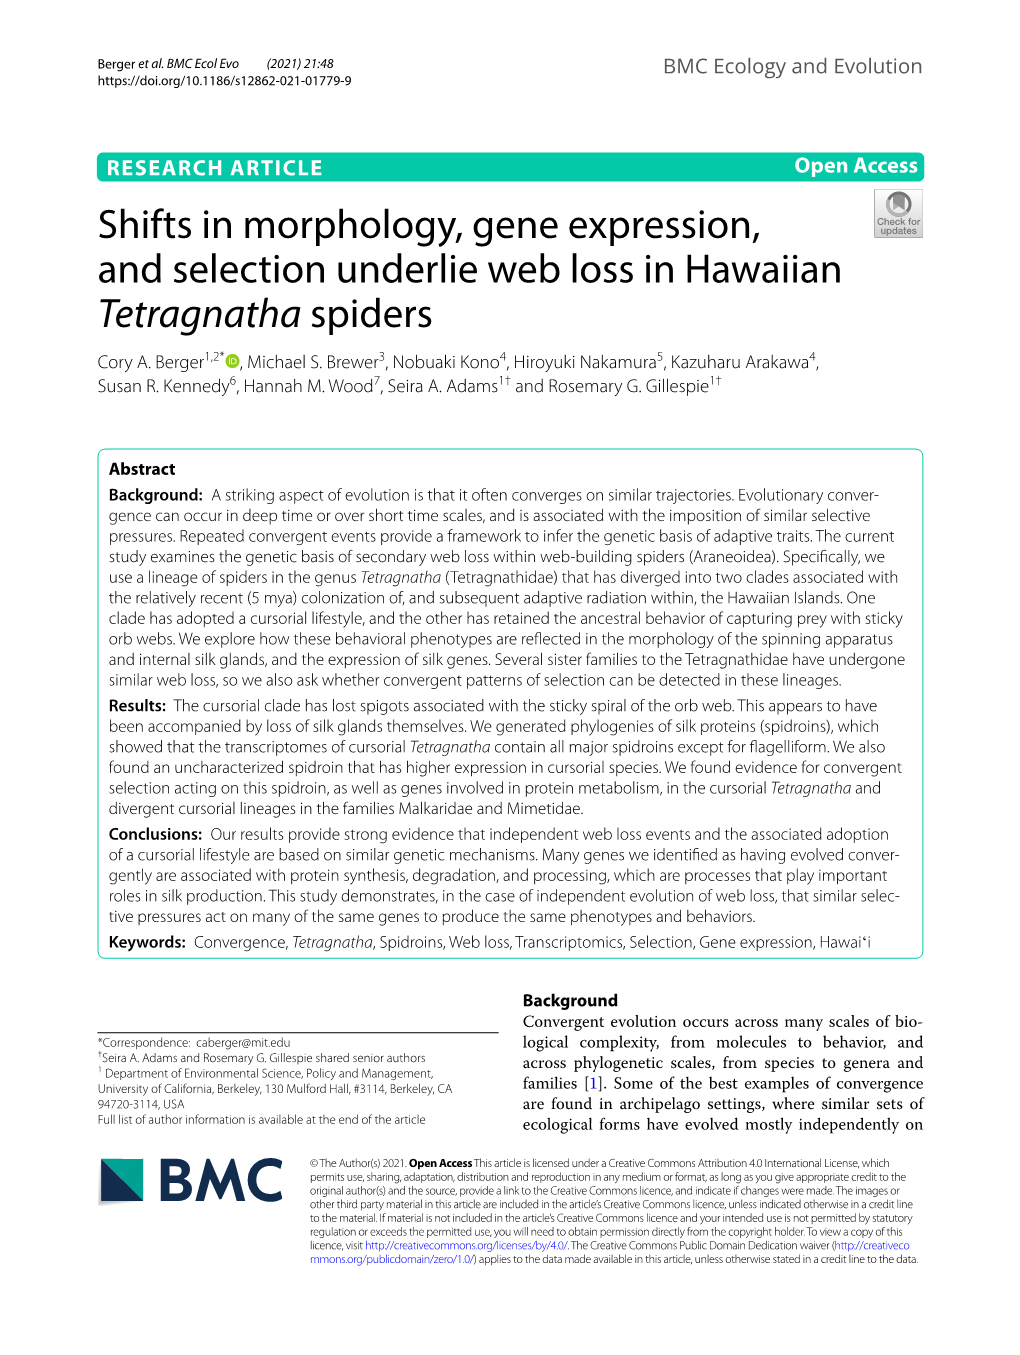 Shifts in Morphology, Gene Expression, and Selection Underlie Web Loss in Hawaiian Tetragnatha Spiders Cory A